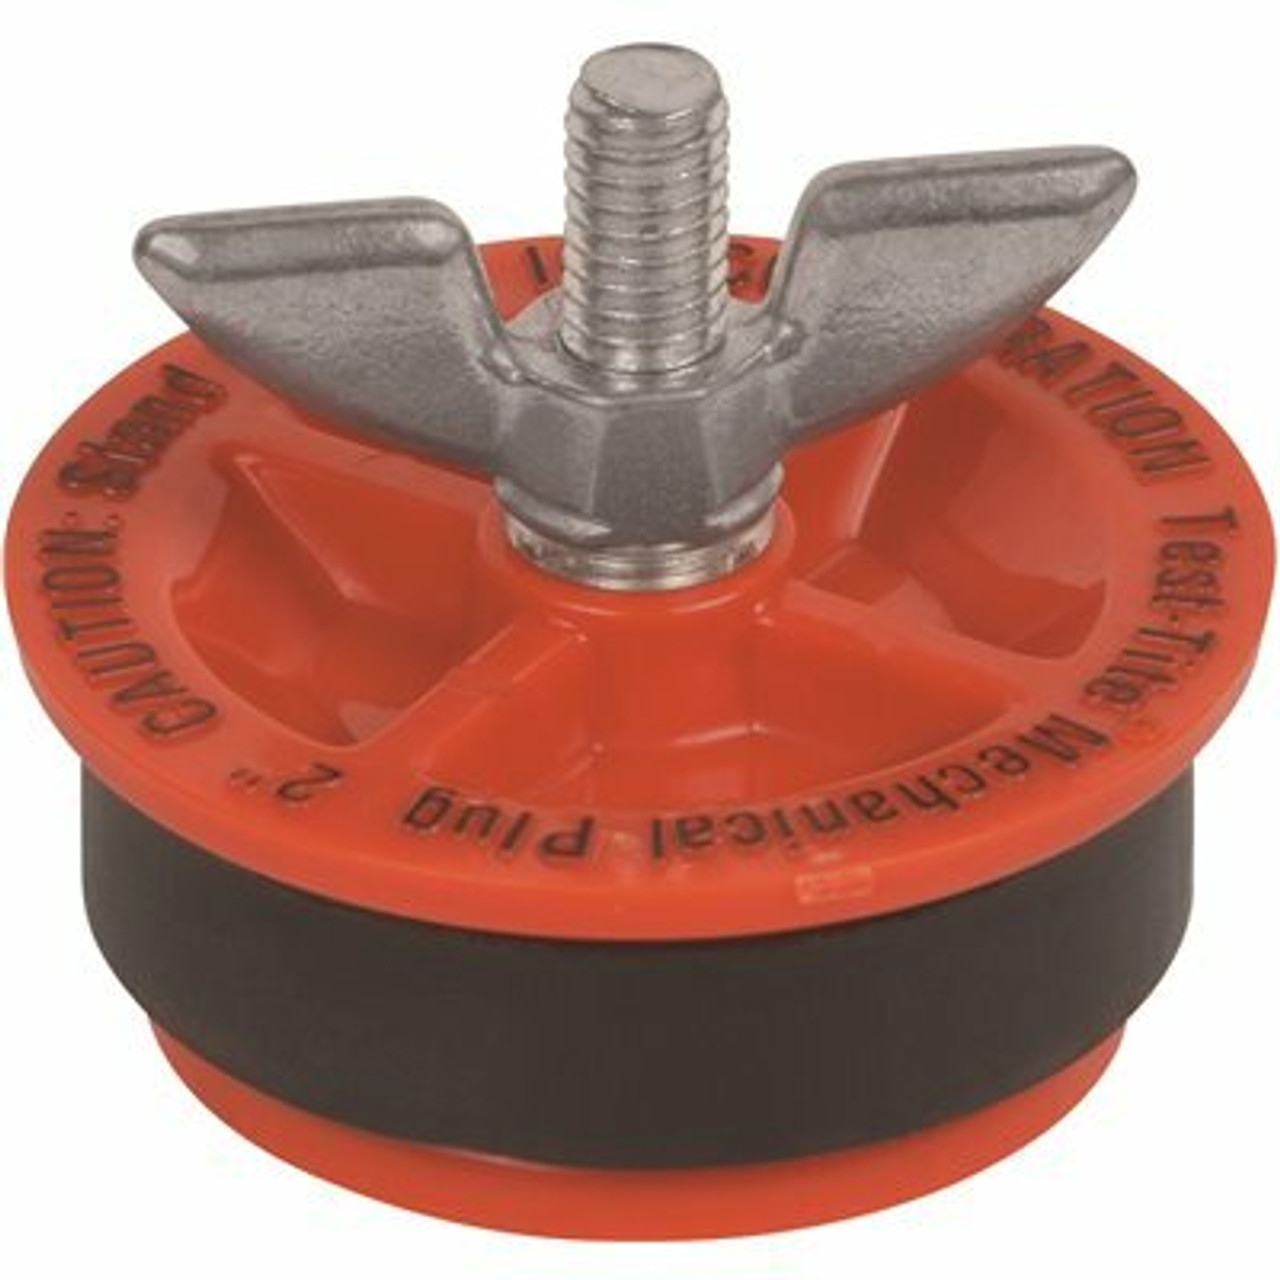 Test-Tite Twist-Tite Abs 2 In. X 2 In. Mechanical Plastic Test Plug, End-Of-Pipe Use Only (10-Pack)